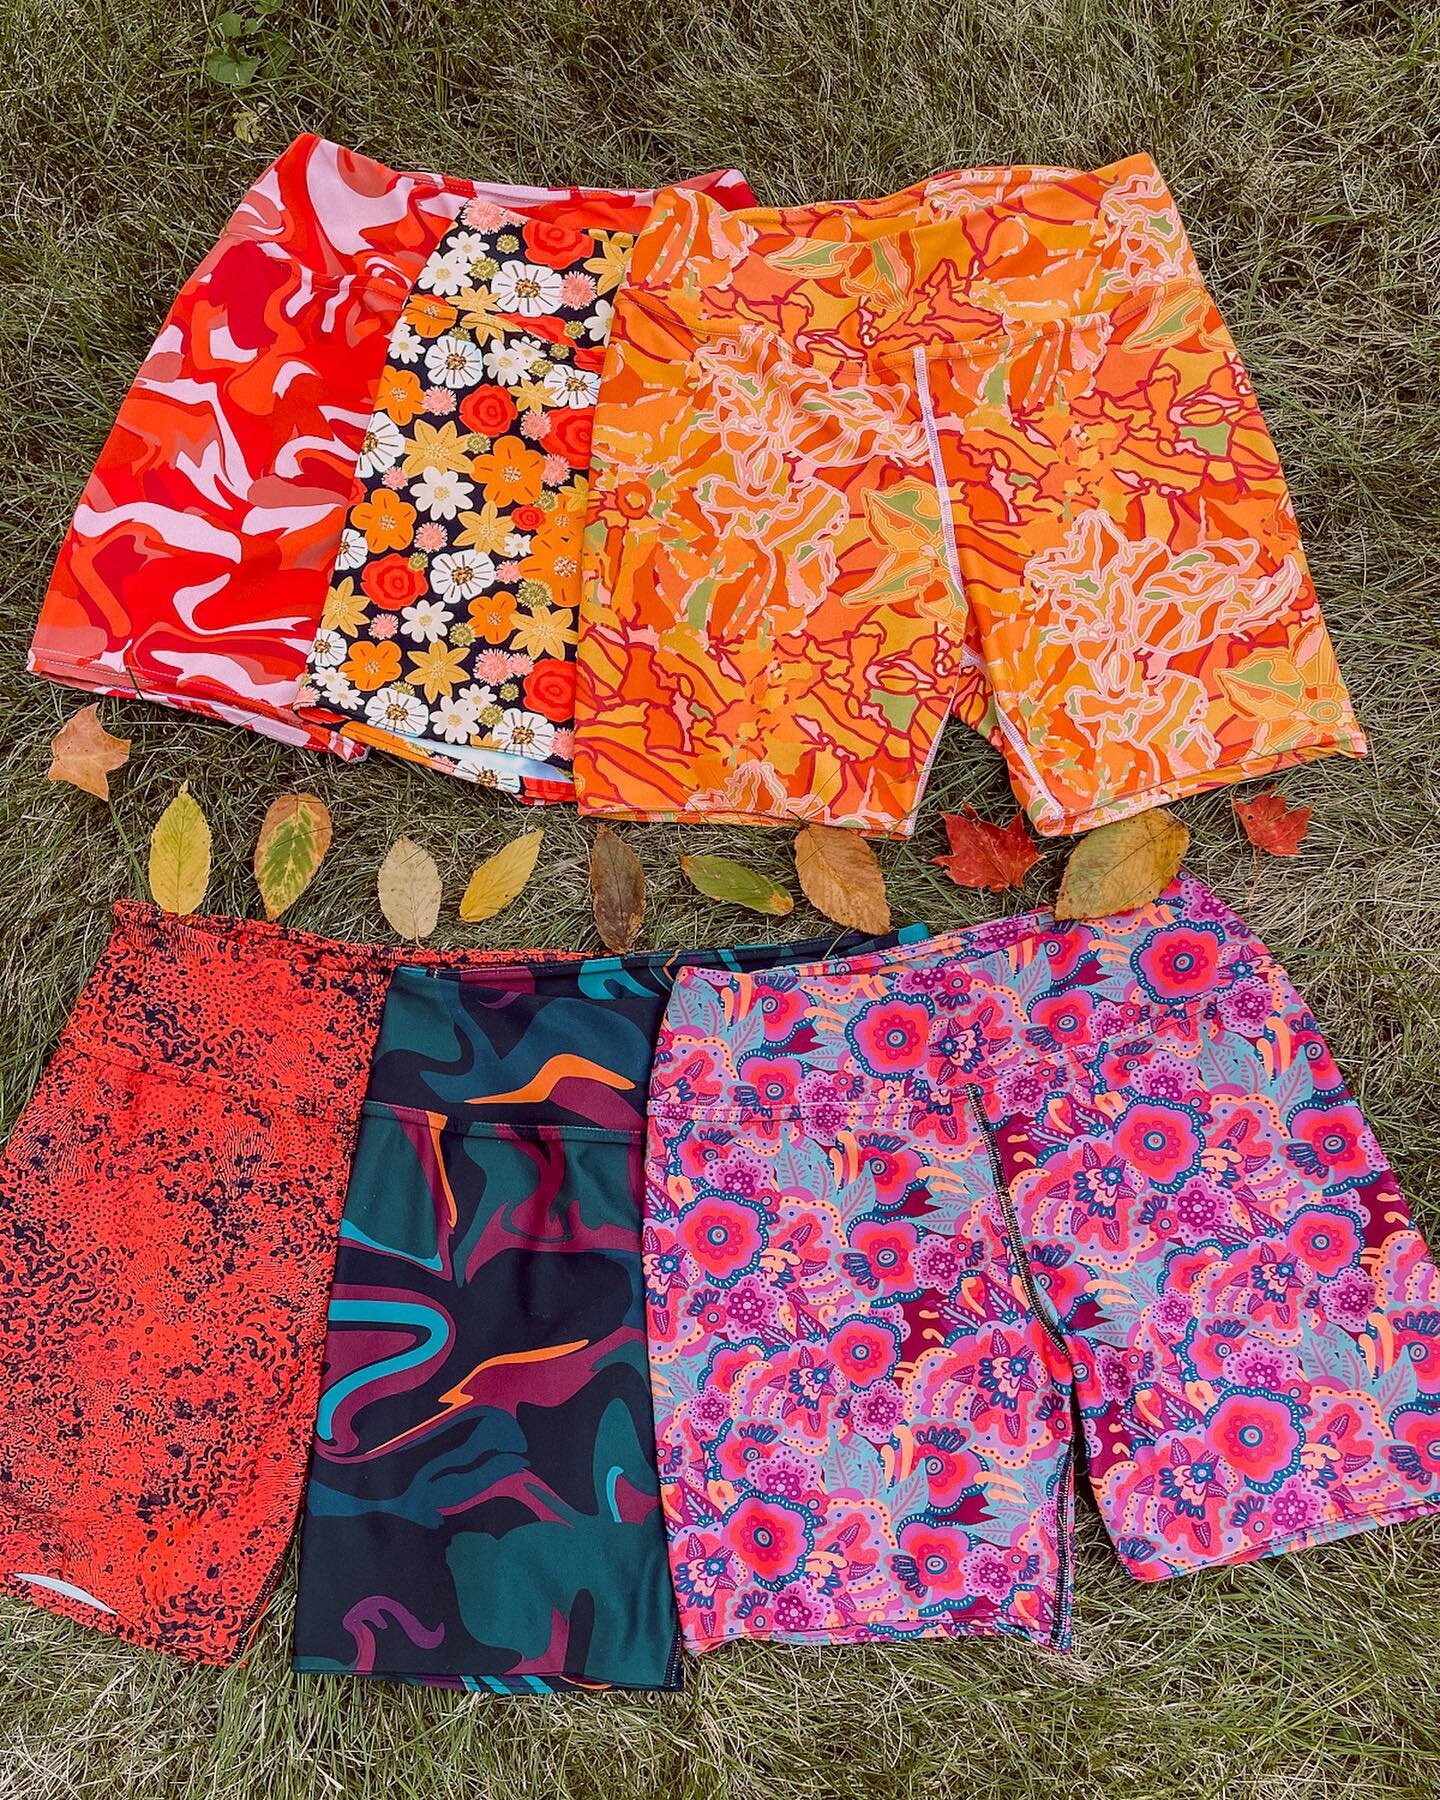 😍 ALL BIKE SHORTS ON SALE NOW!!

Snag your favorite pair of colorful bike shorts for yourself, or for a gift! Take 15% off when you sign up with your email AND get free shipping on all orders!

👉🏻 All bike shorts are high rise with a 5 inch inseam